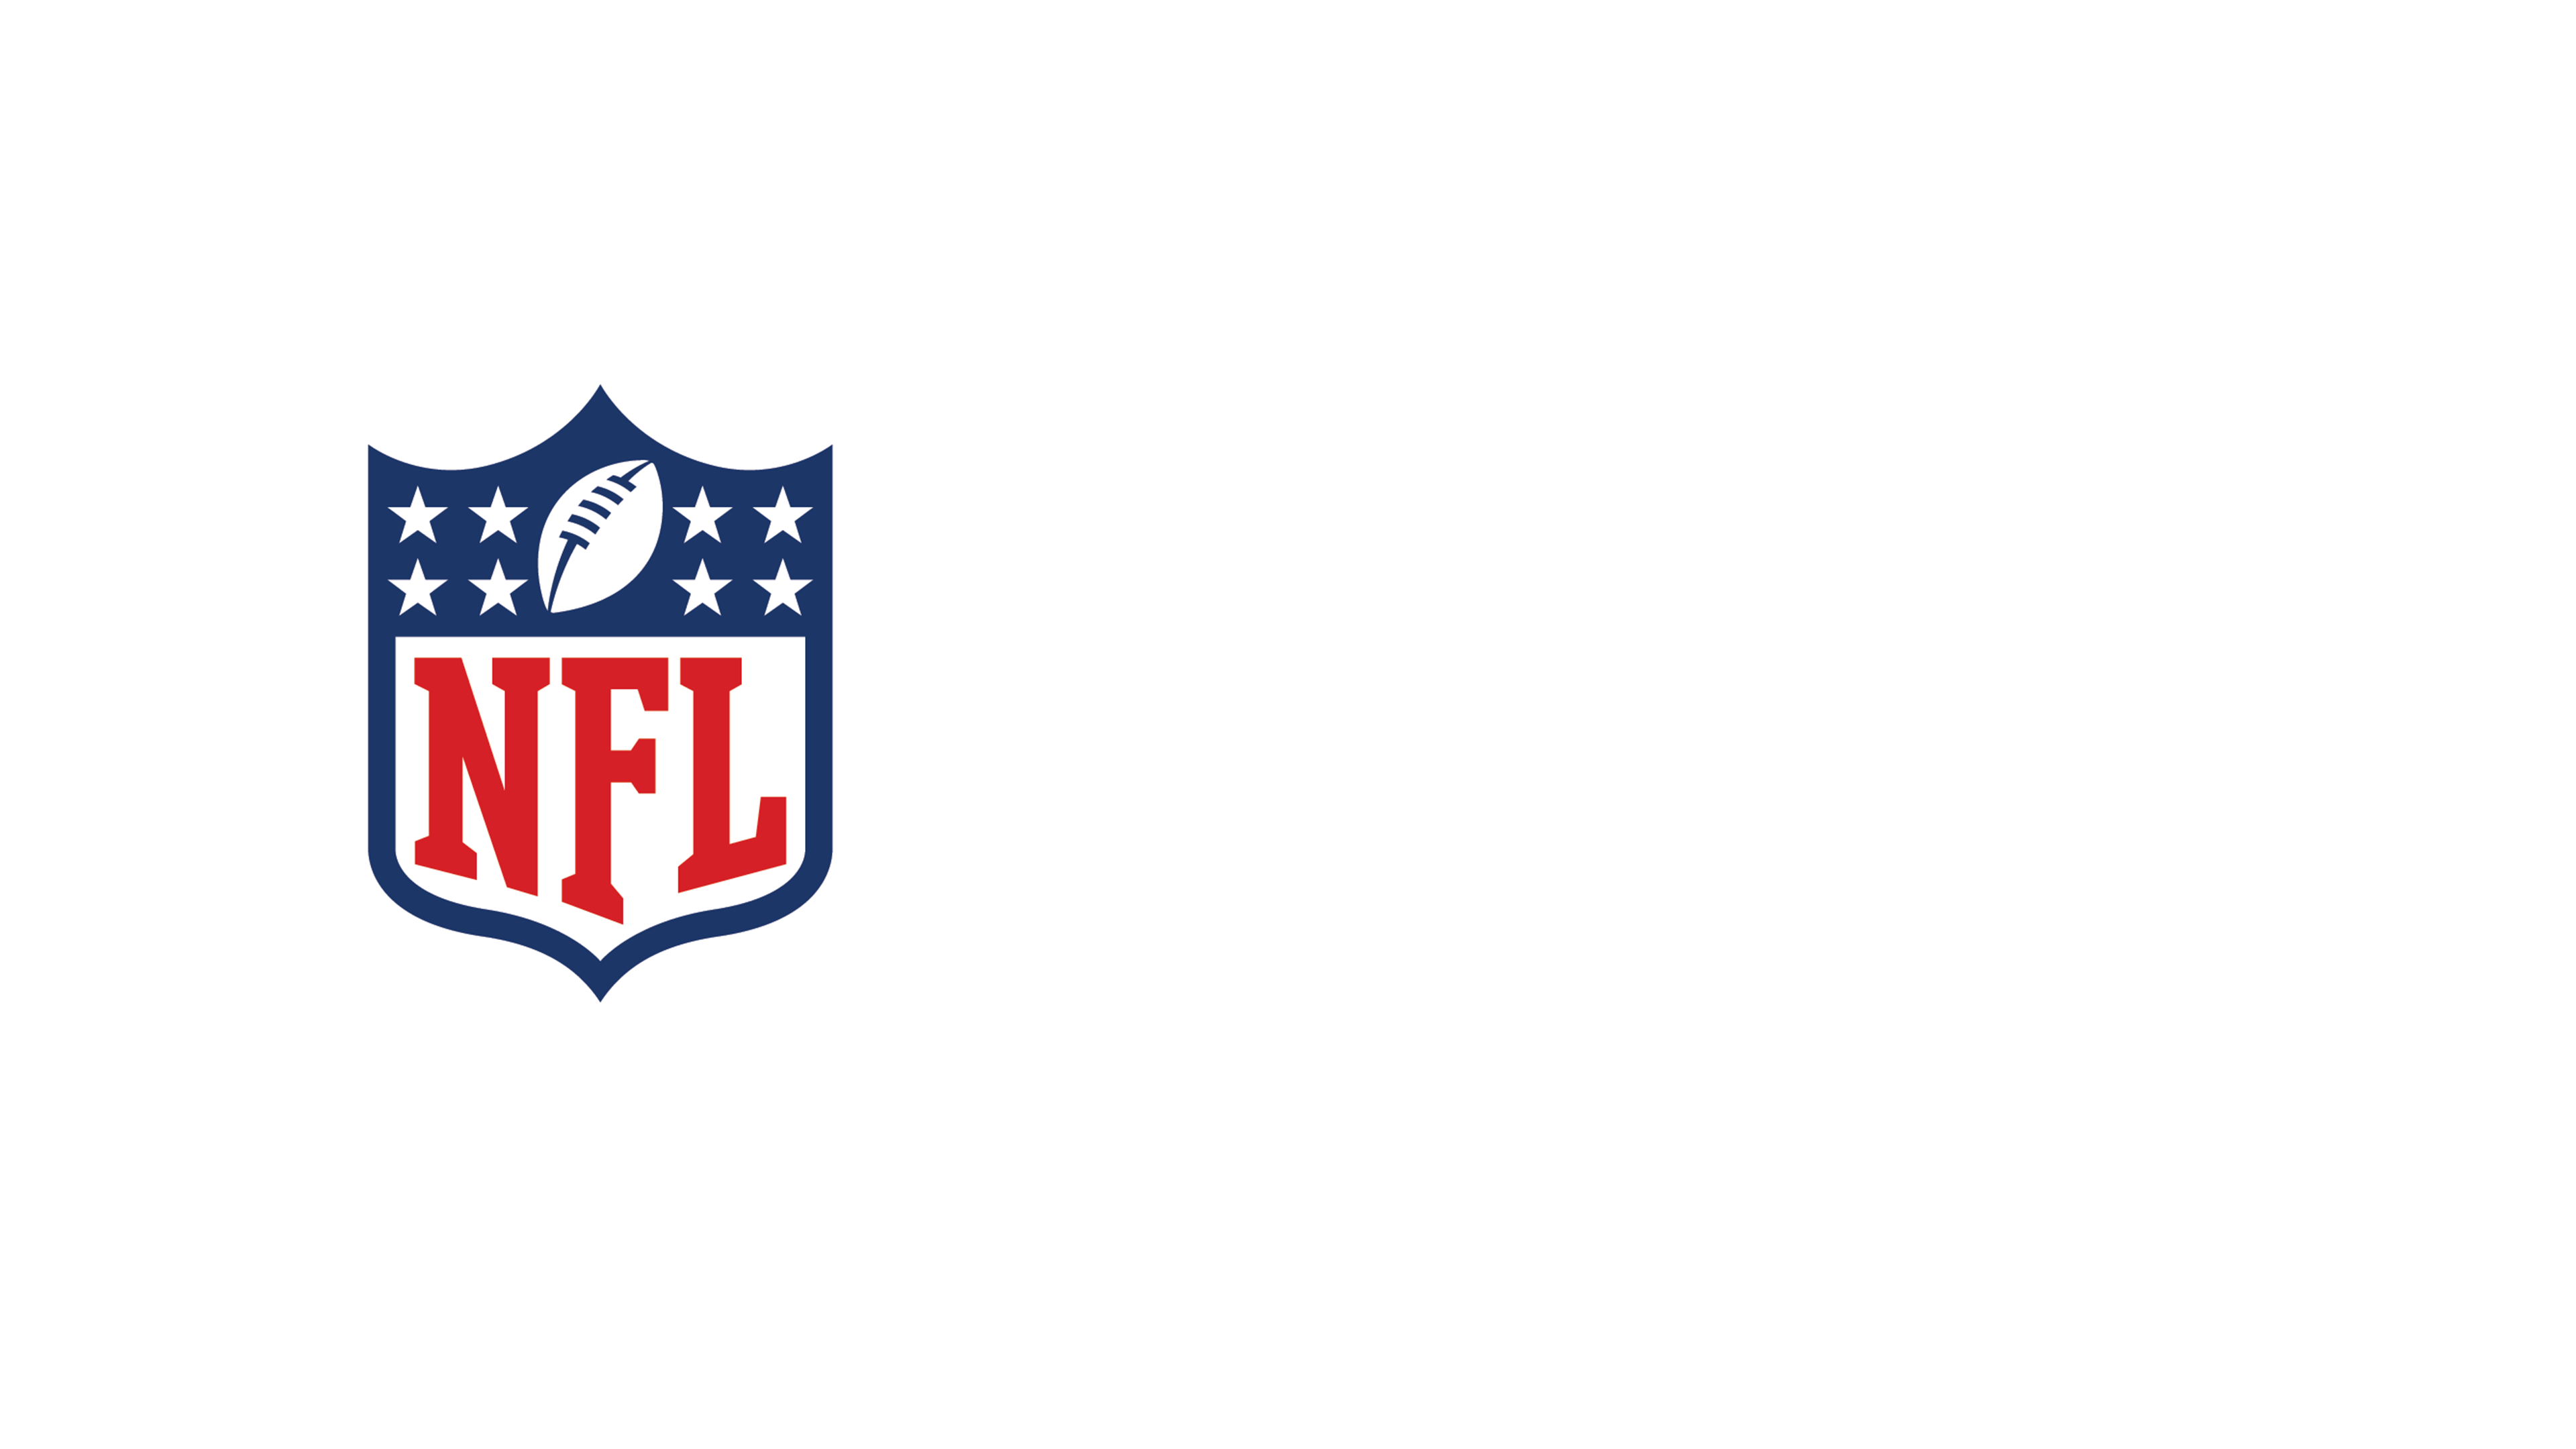 NFL Total Access - NFL Network